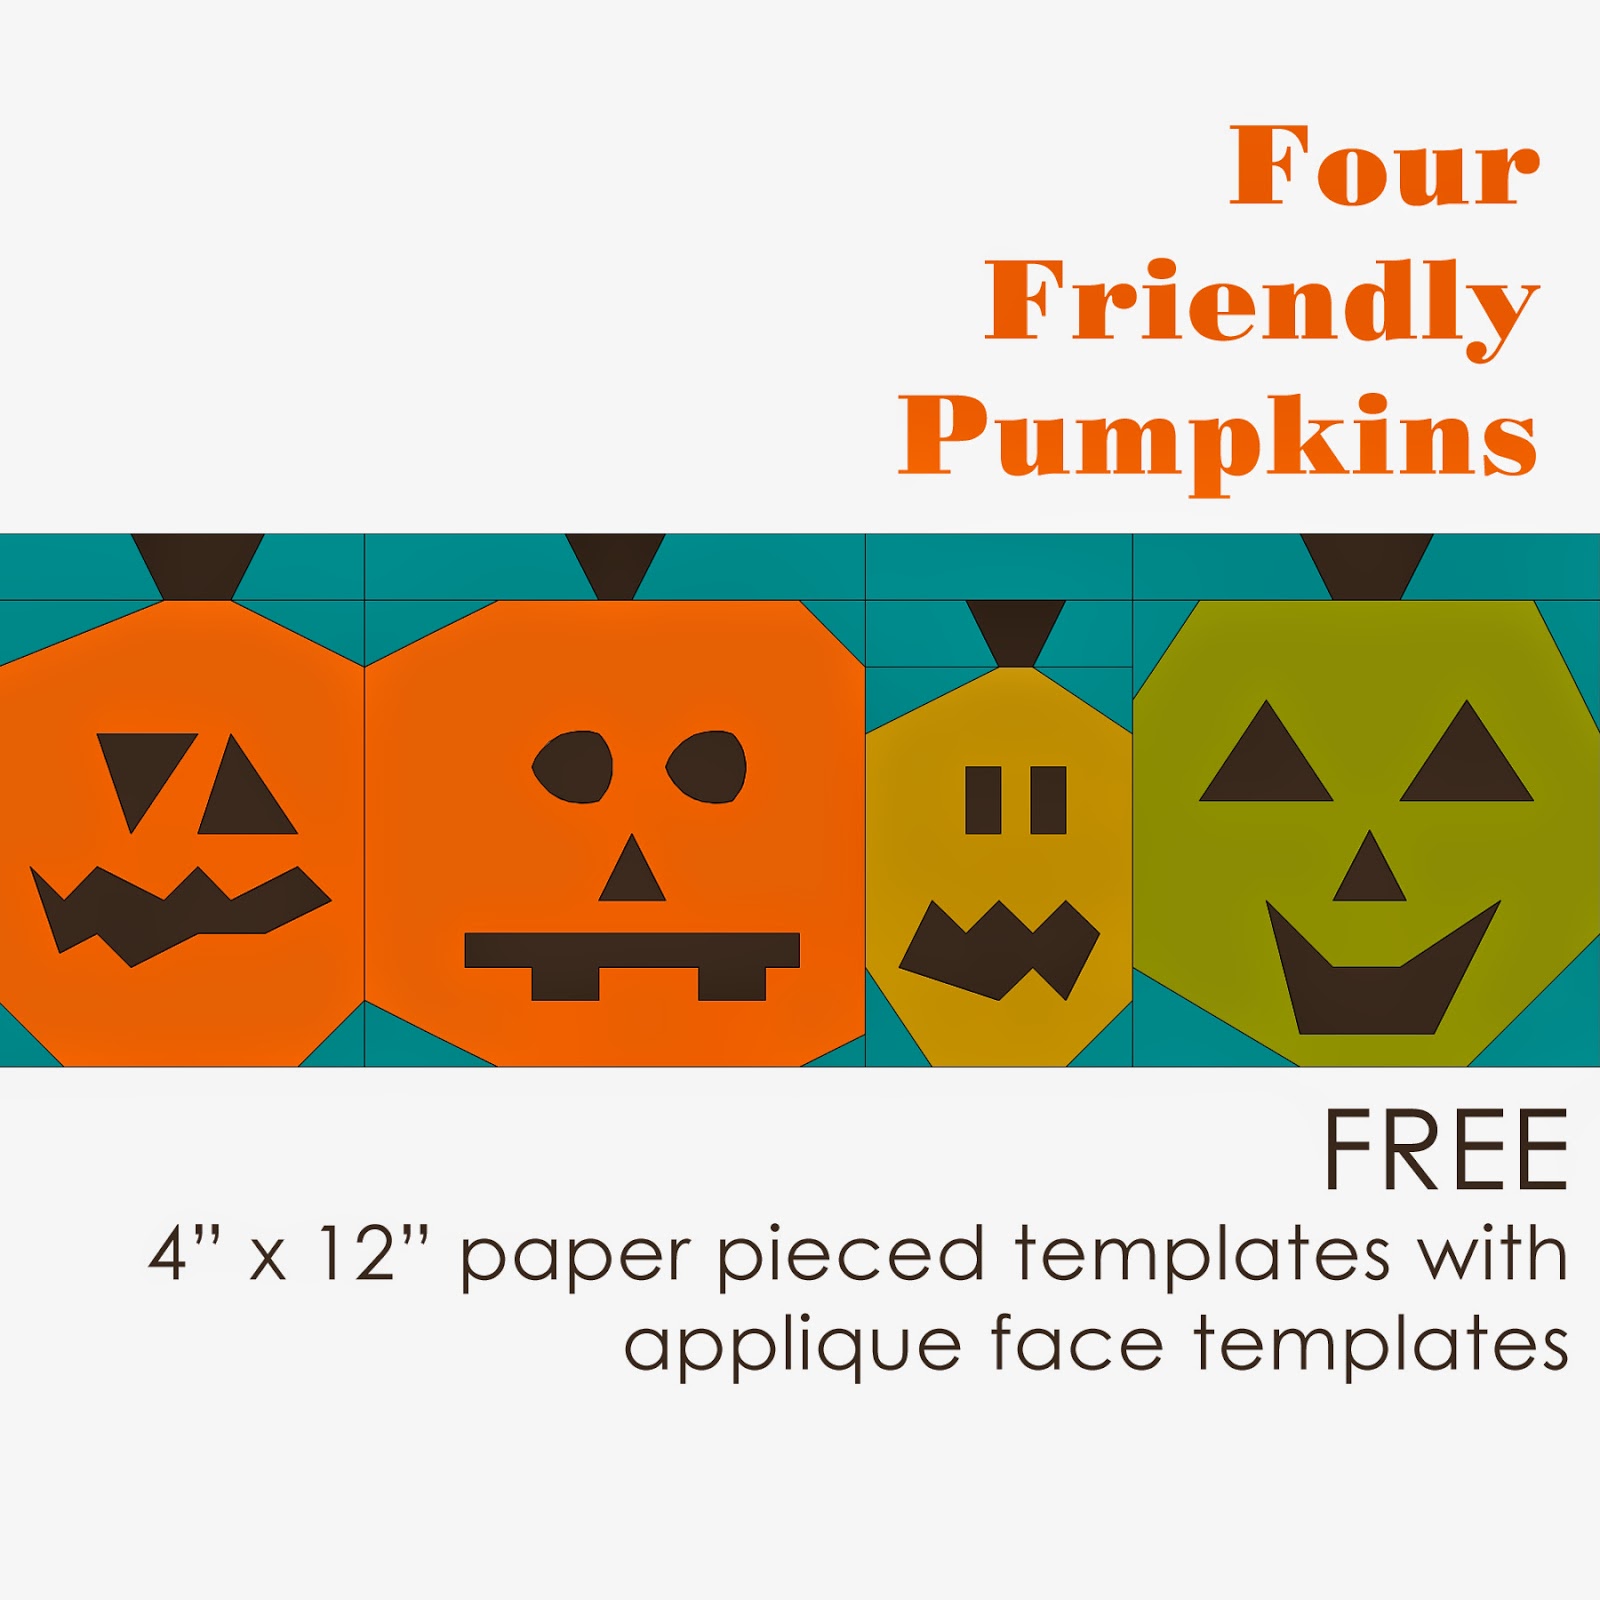 http://www.craftsy.com/pattern/quilting/home-decor/four-friendly-pumpkins/118891